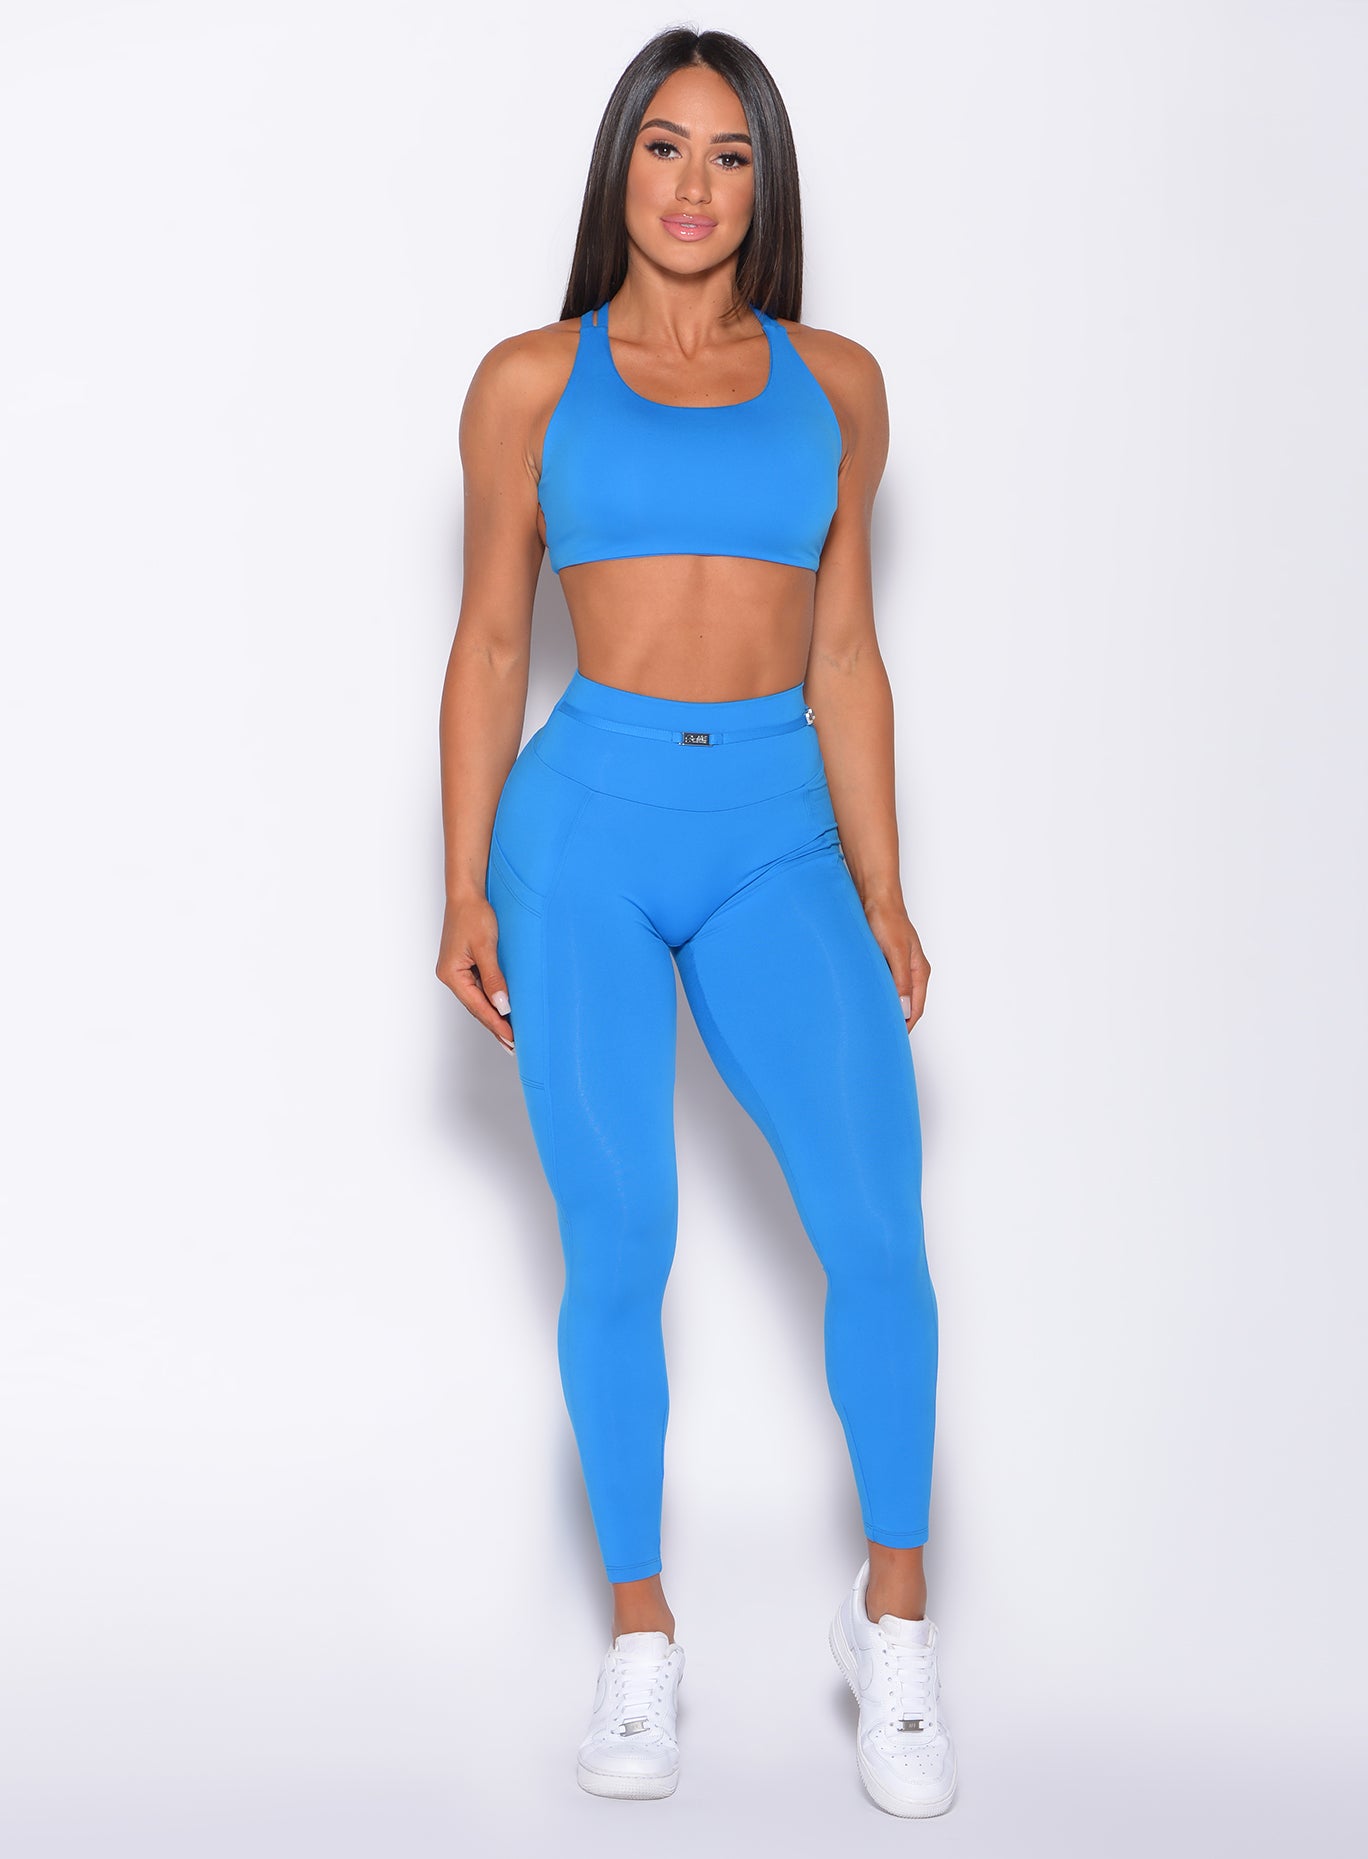 front profile view of a model facing forward wearing our barbell leggings in crystal pop blue color and a matching bra